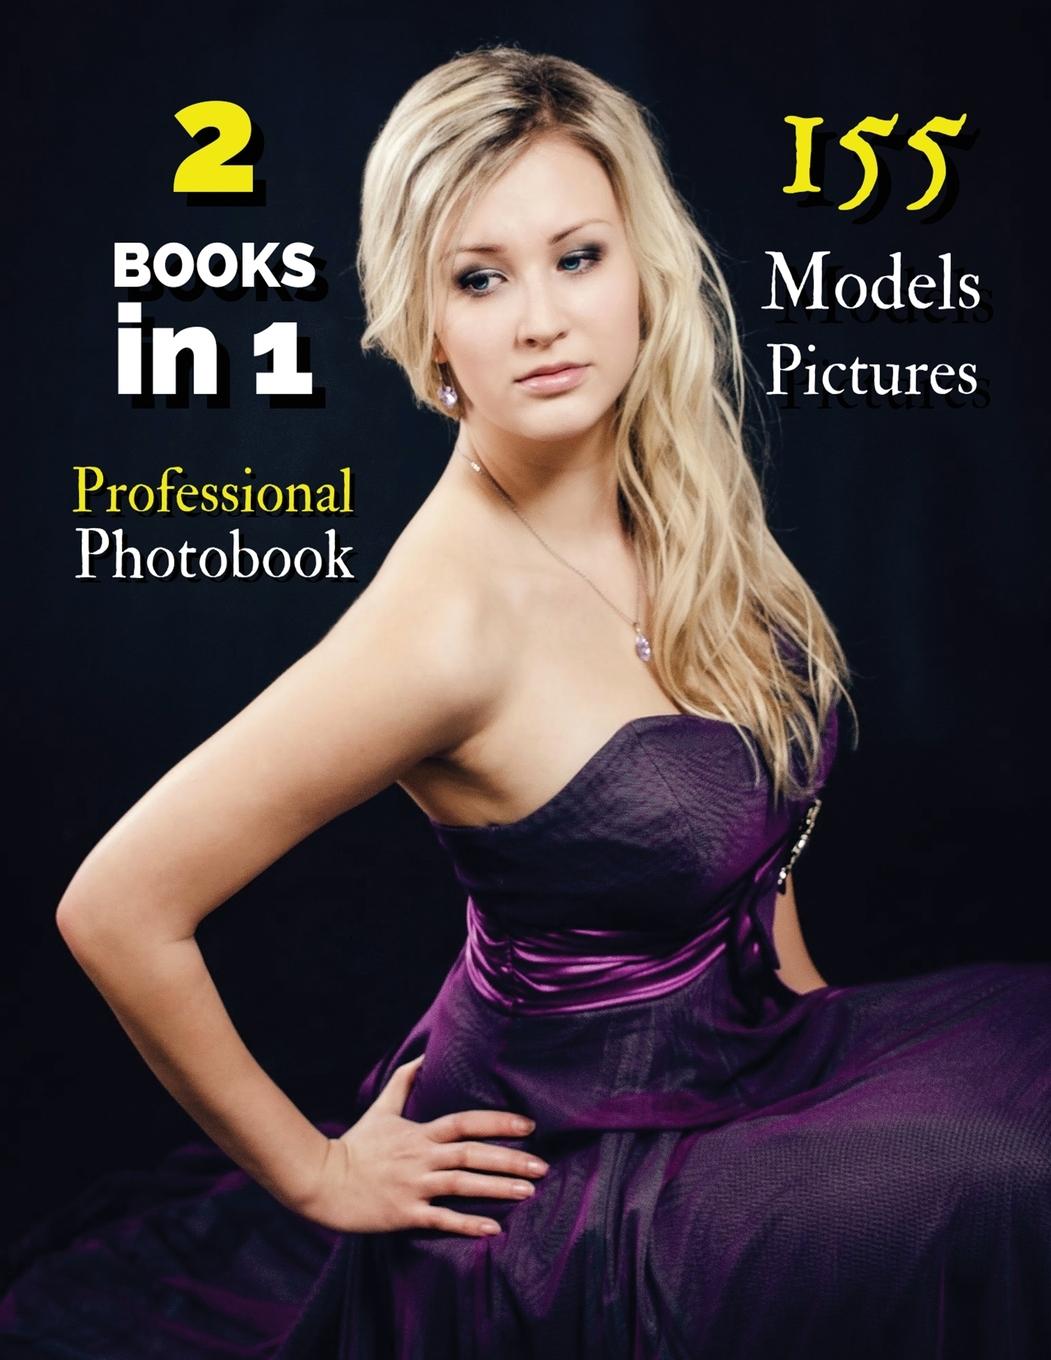 Carte [ 2 Books in 1 ] - Professional Photobook with 155 Models Pictures - This Book Contains 2 Photo Albums 